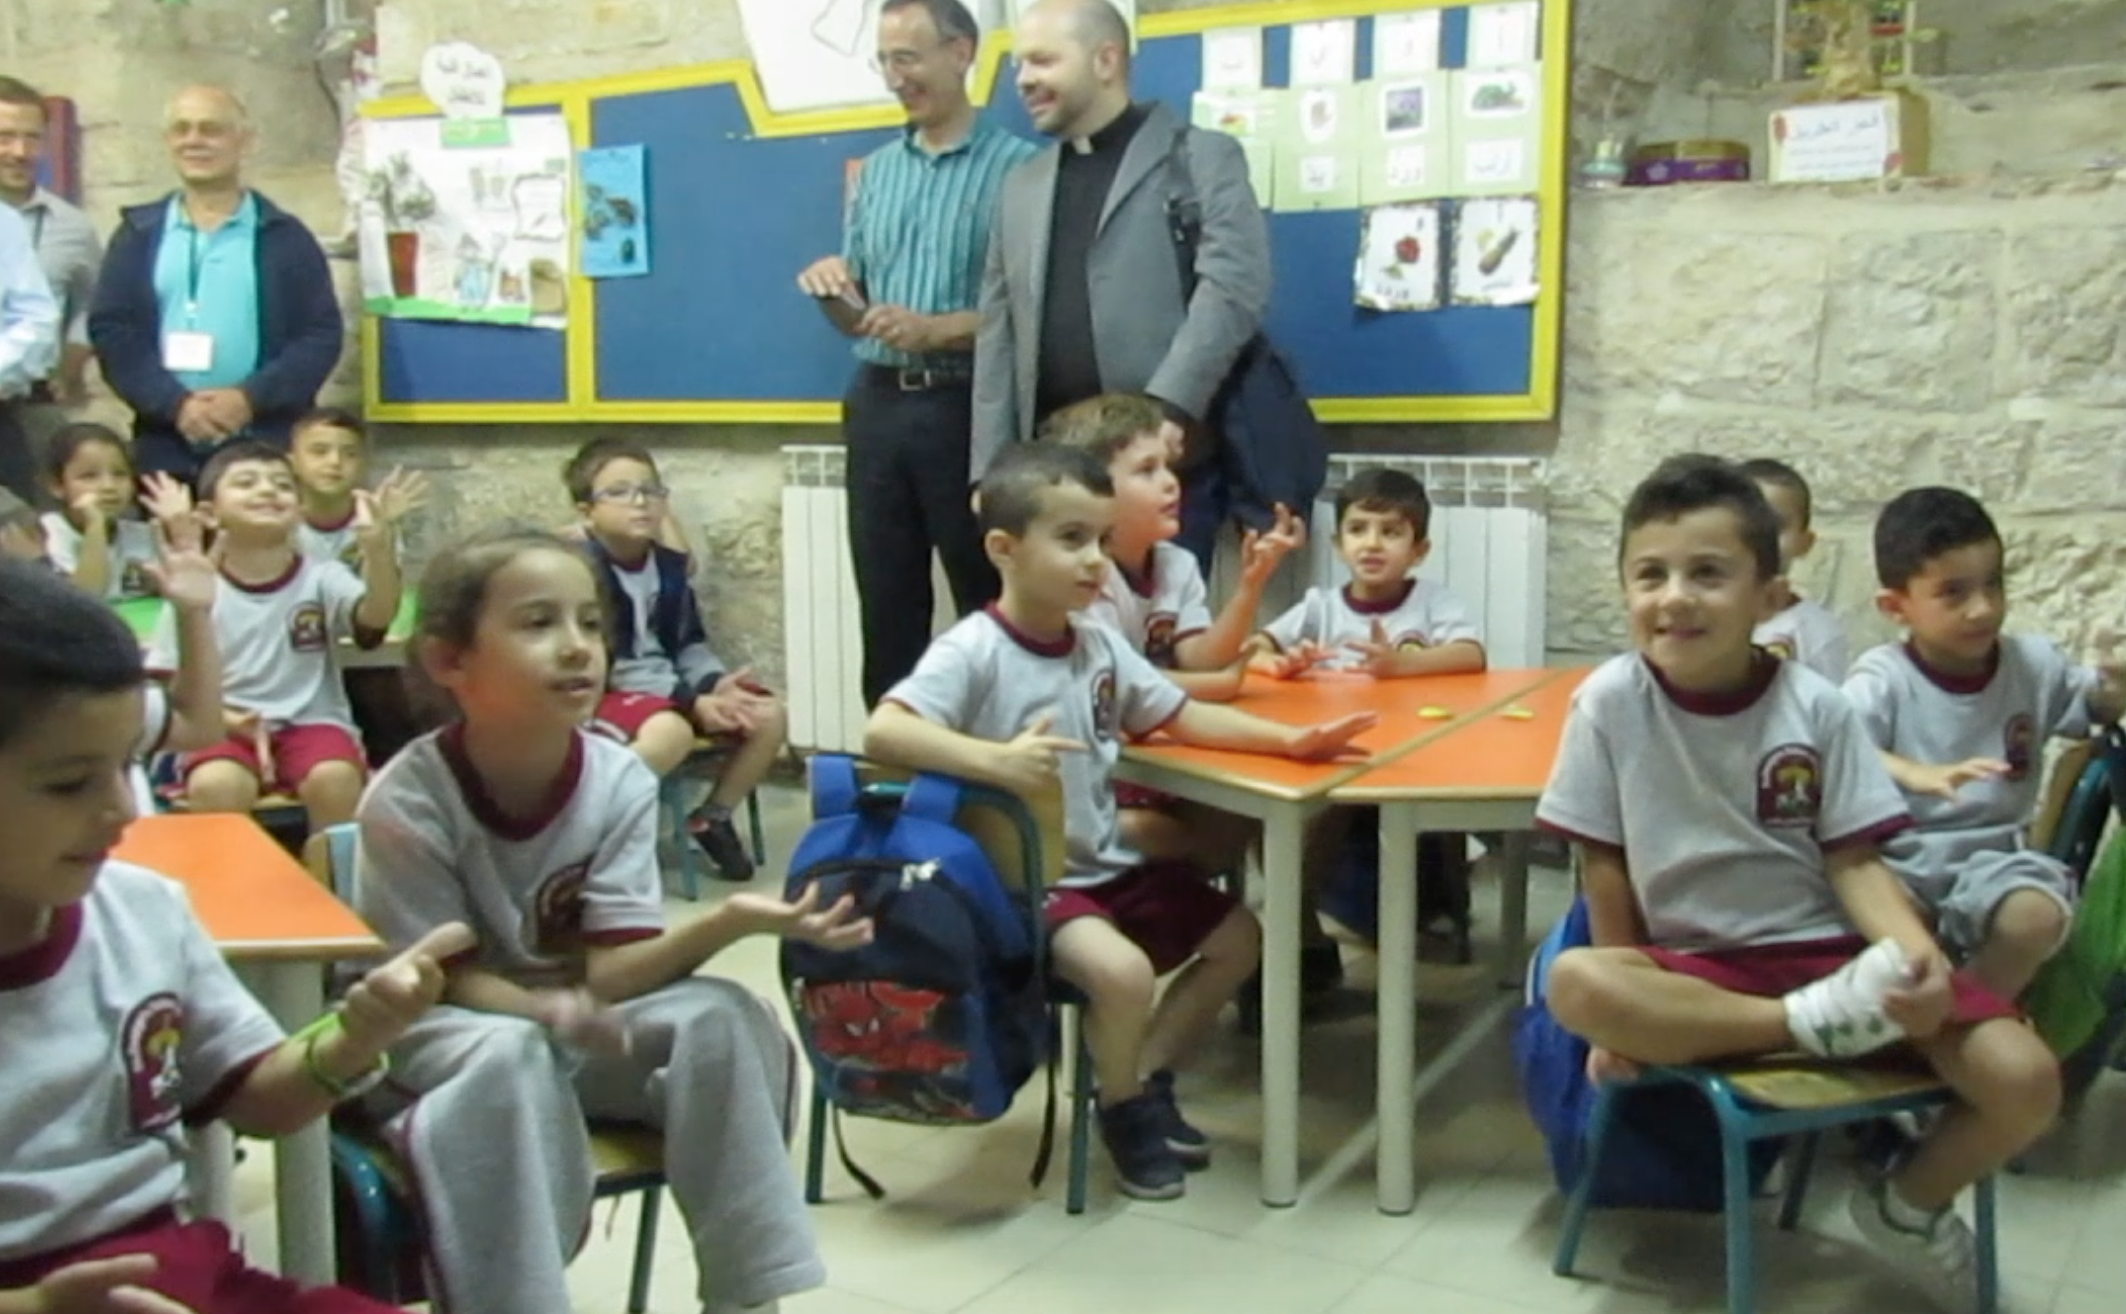 A photo of young elementary boys and girls in classroom at Palestinian school, St. George's.